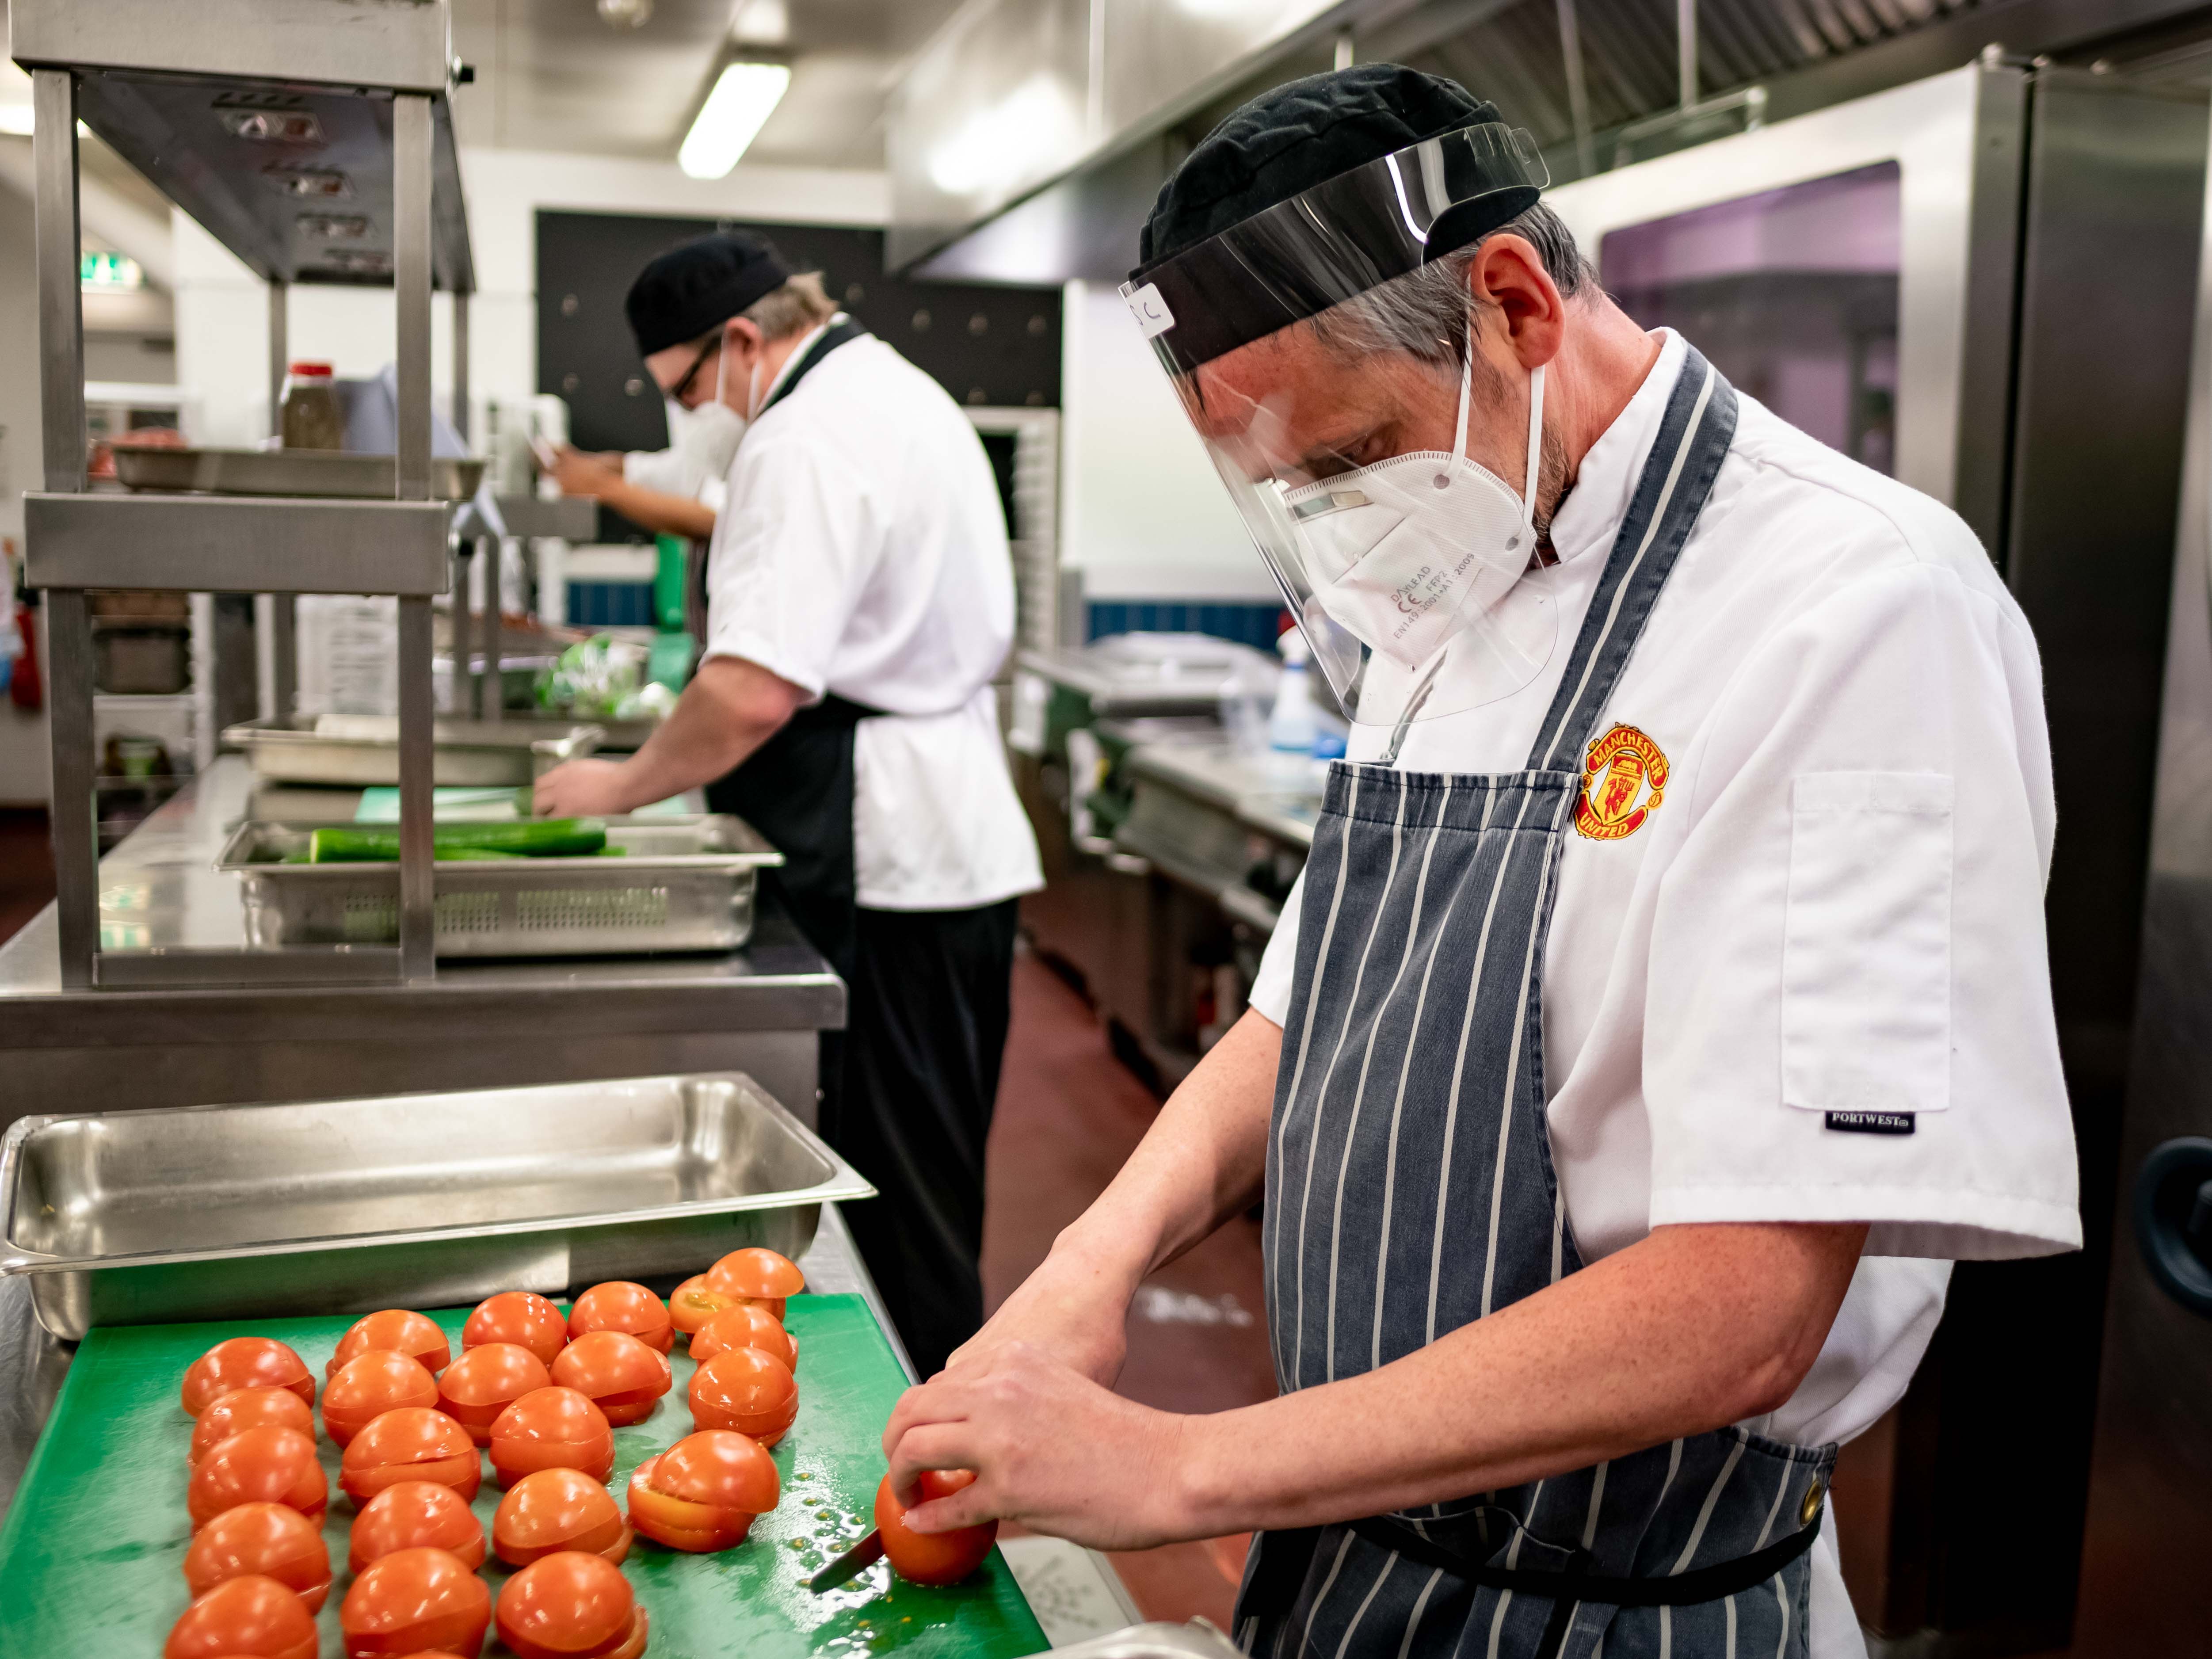 Manchester United staff have been making meals to distribute 